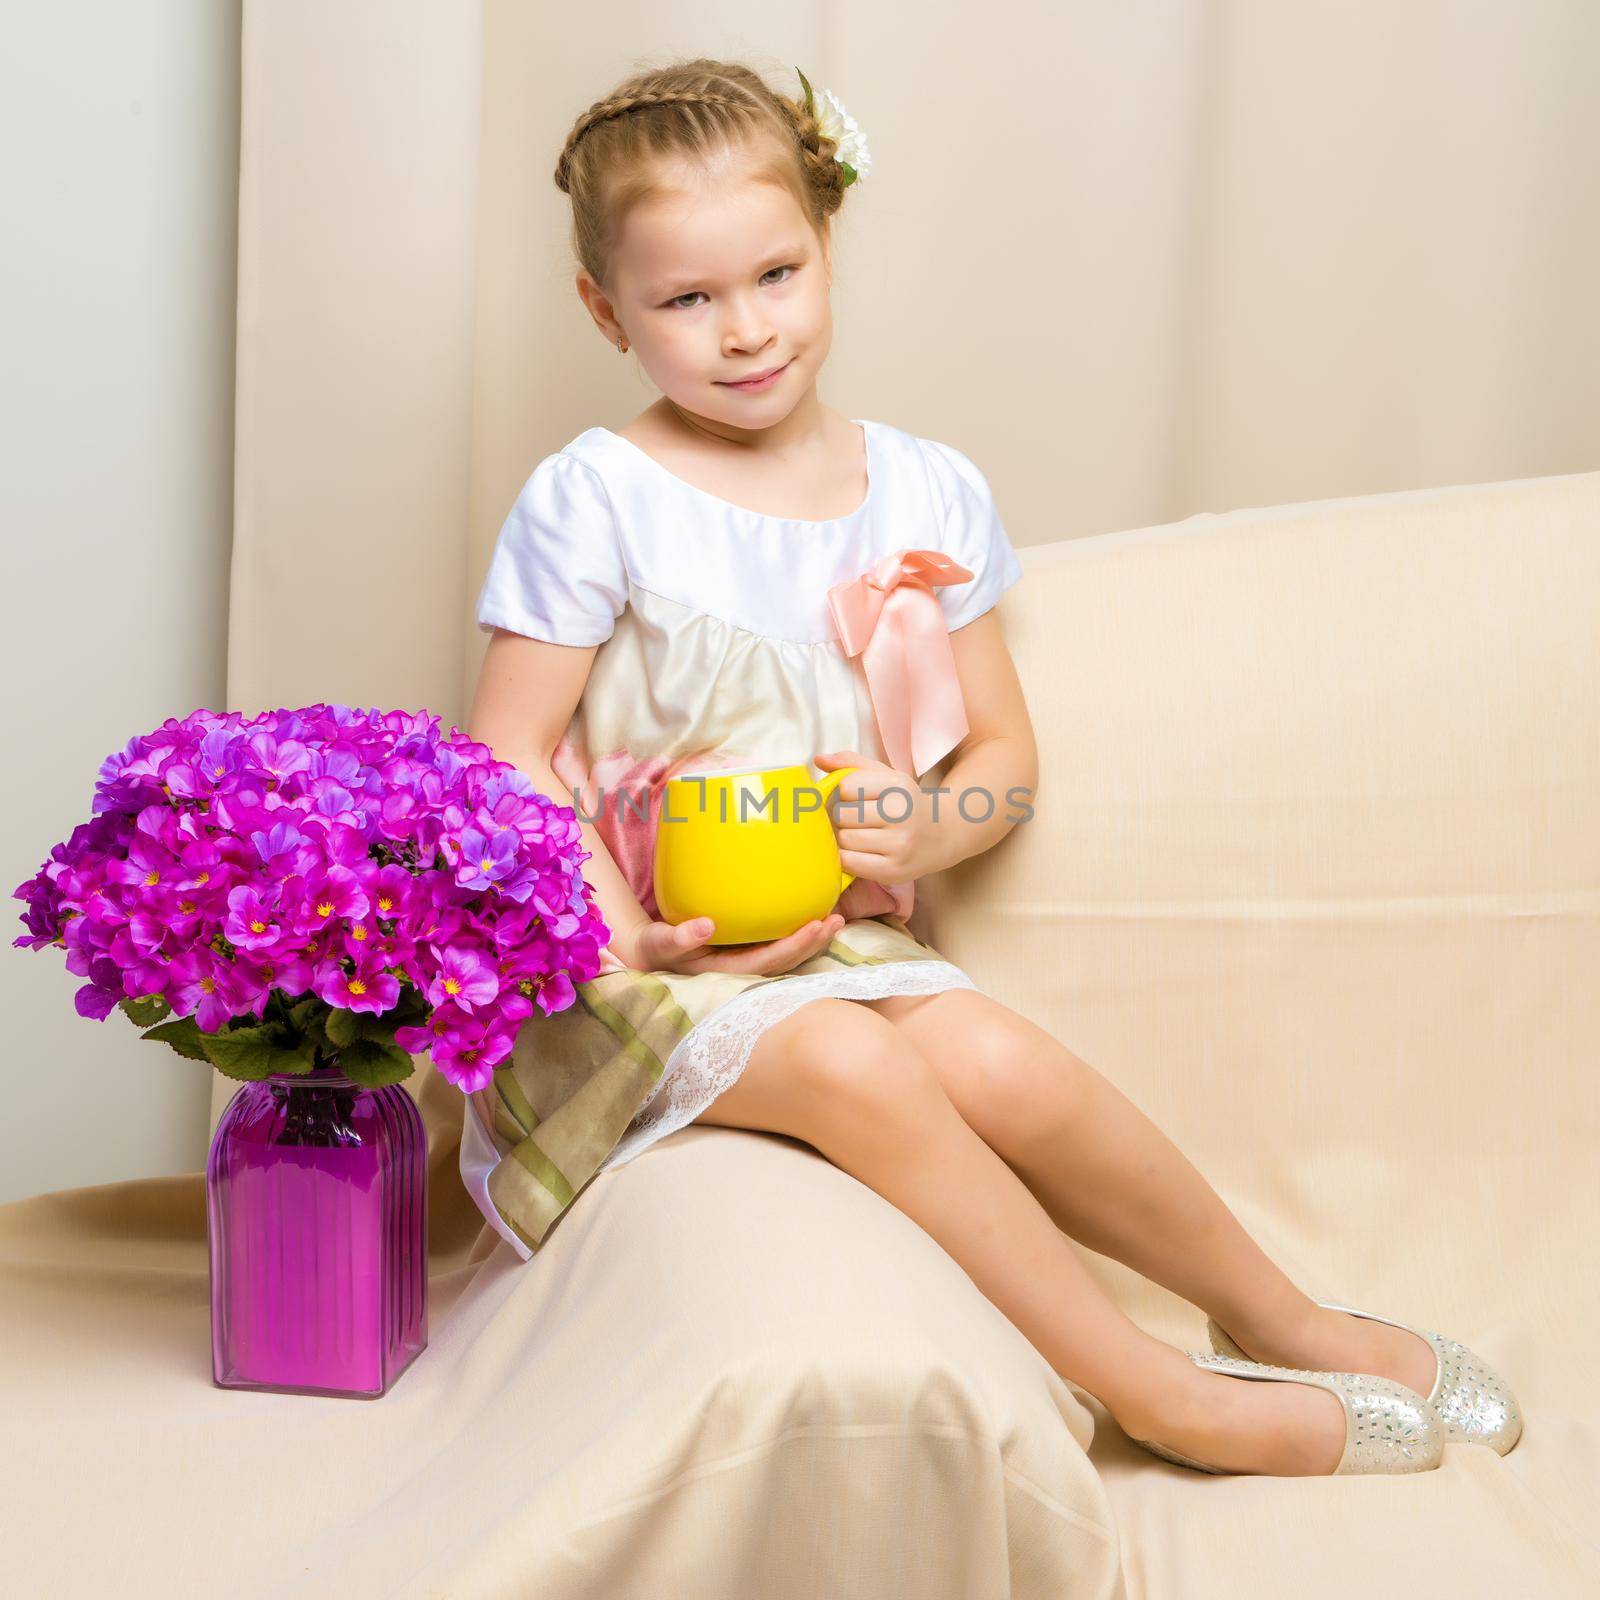 Little girl with a bouquet of flowers by kolesnikov_studio